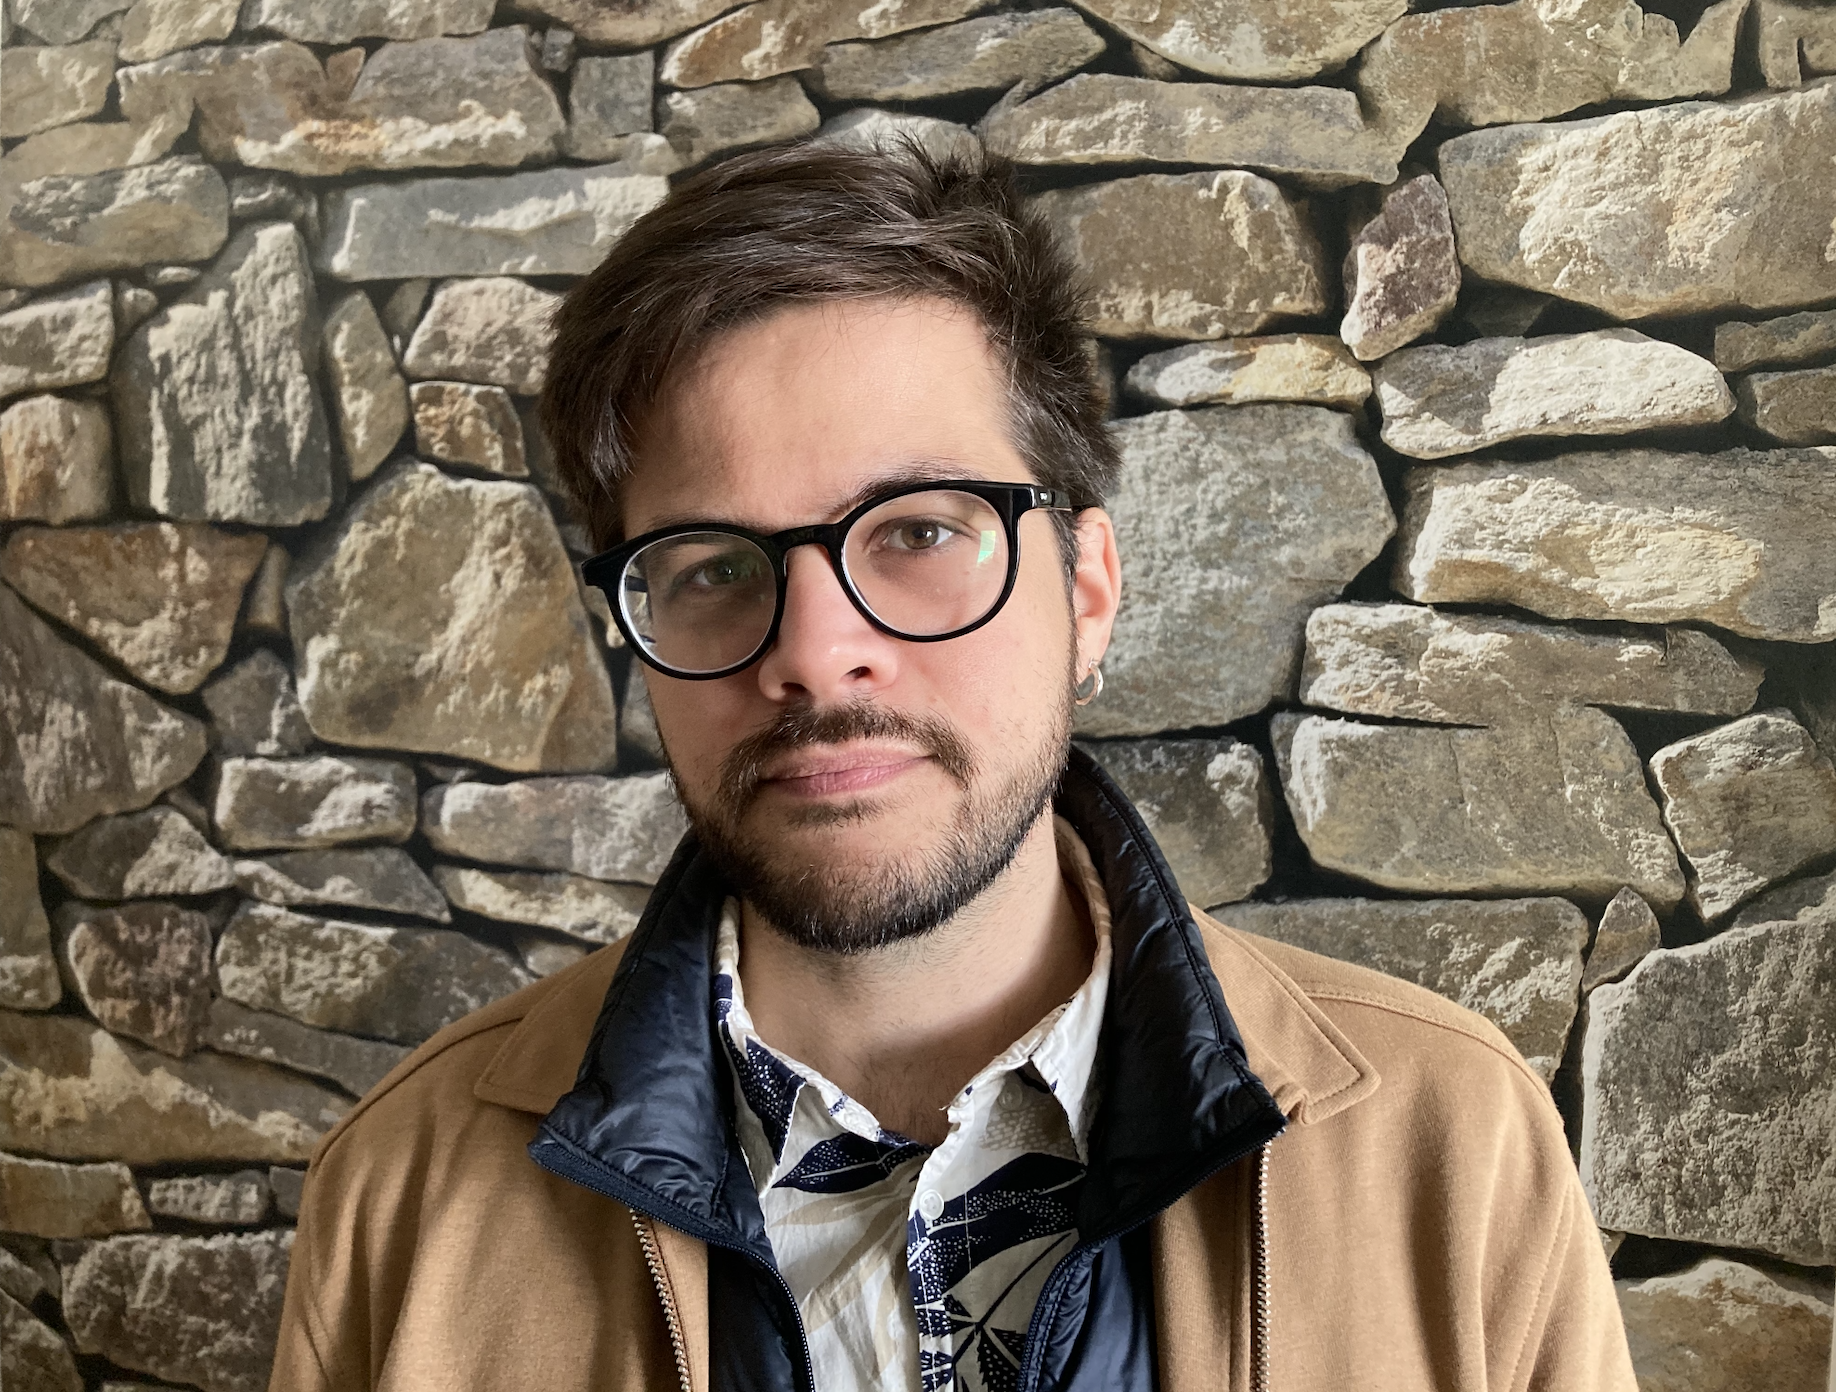 Profile shot of a Latino man with short dark brown hair and beard. He wears corrective glasses with black frames and a pair of jackets (dark blue and light brown) layered over a white shirt with leaf patterns. He looks at the camera half smiling. He is standing in front of a rock wall.